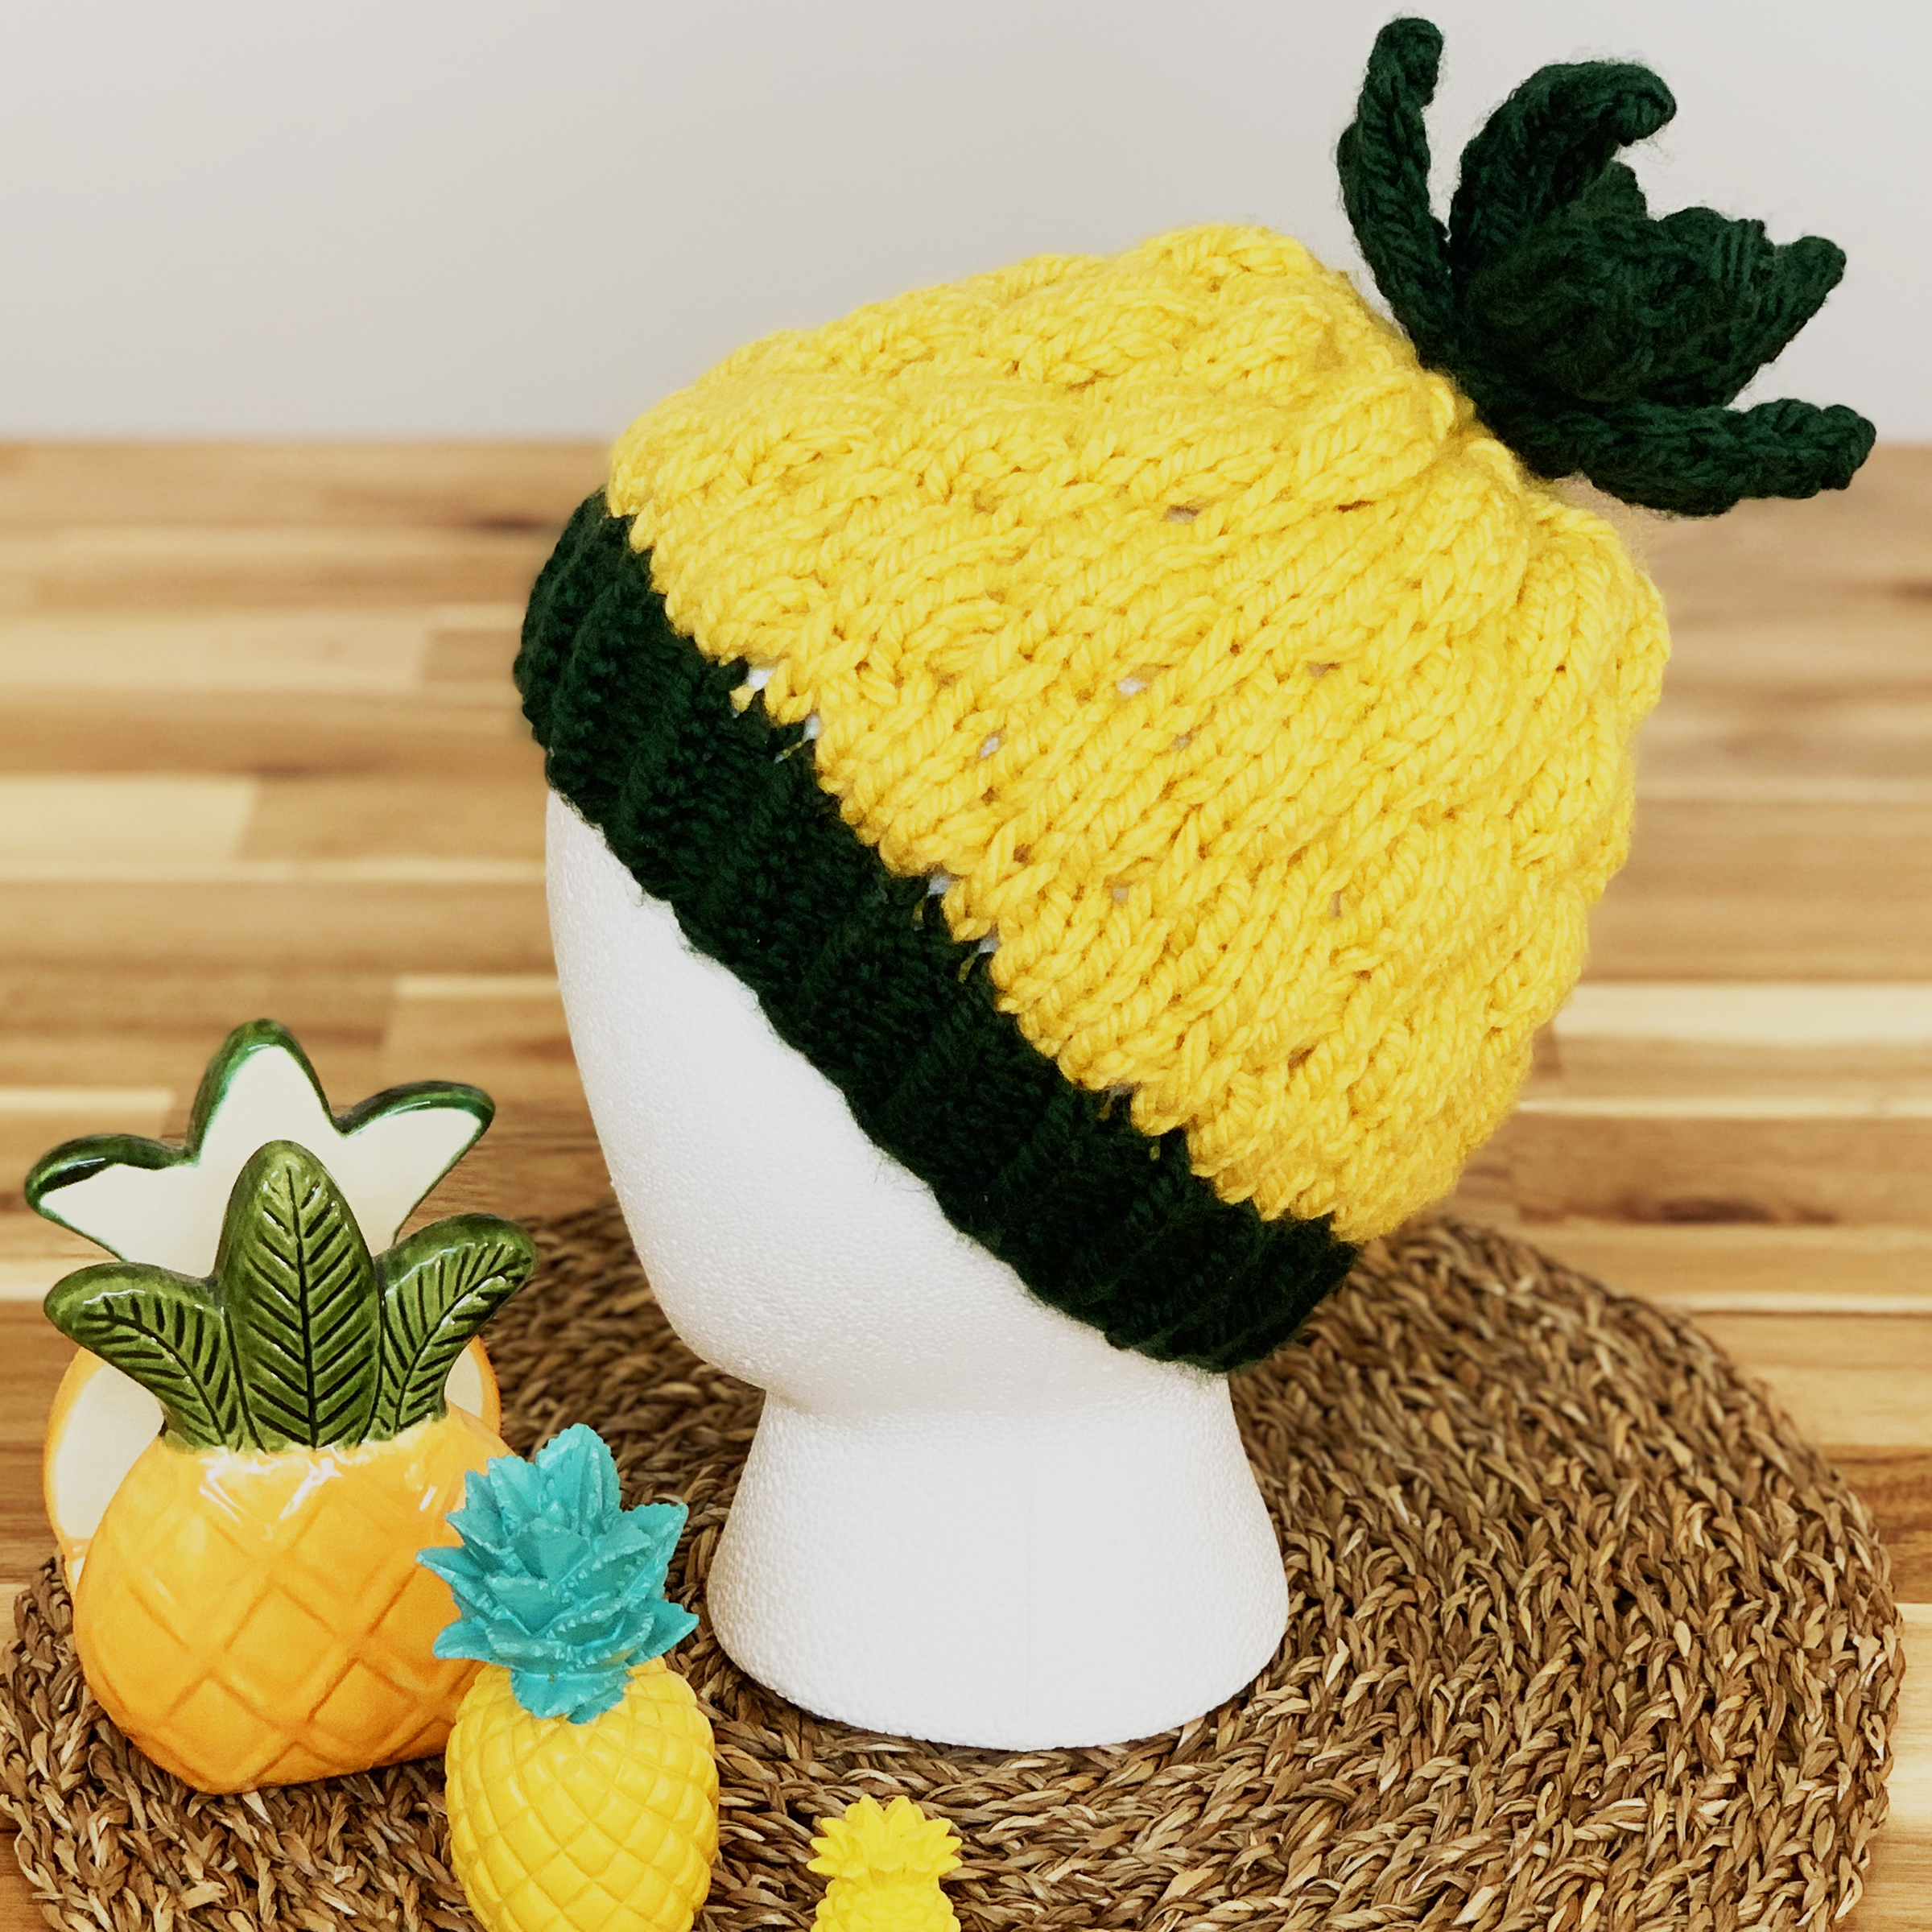 a yellow and black hat that is meant to resemble a pineapple on display head